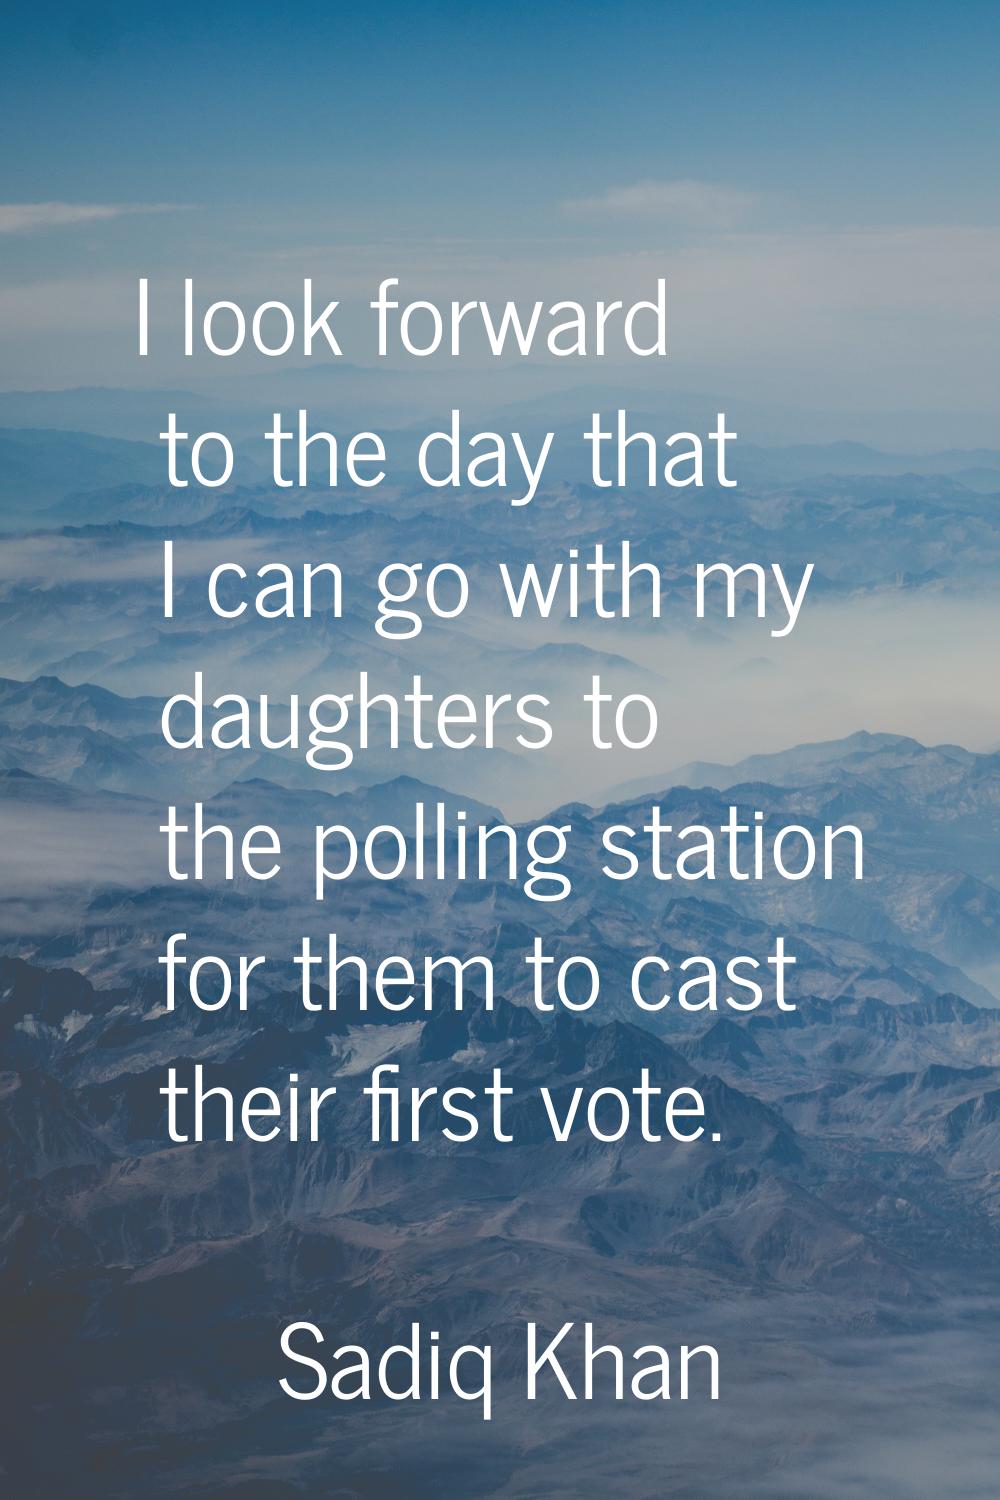 I look forward to the day that I can go with my daughters to the polling station for them to cast t